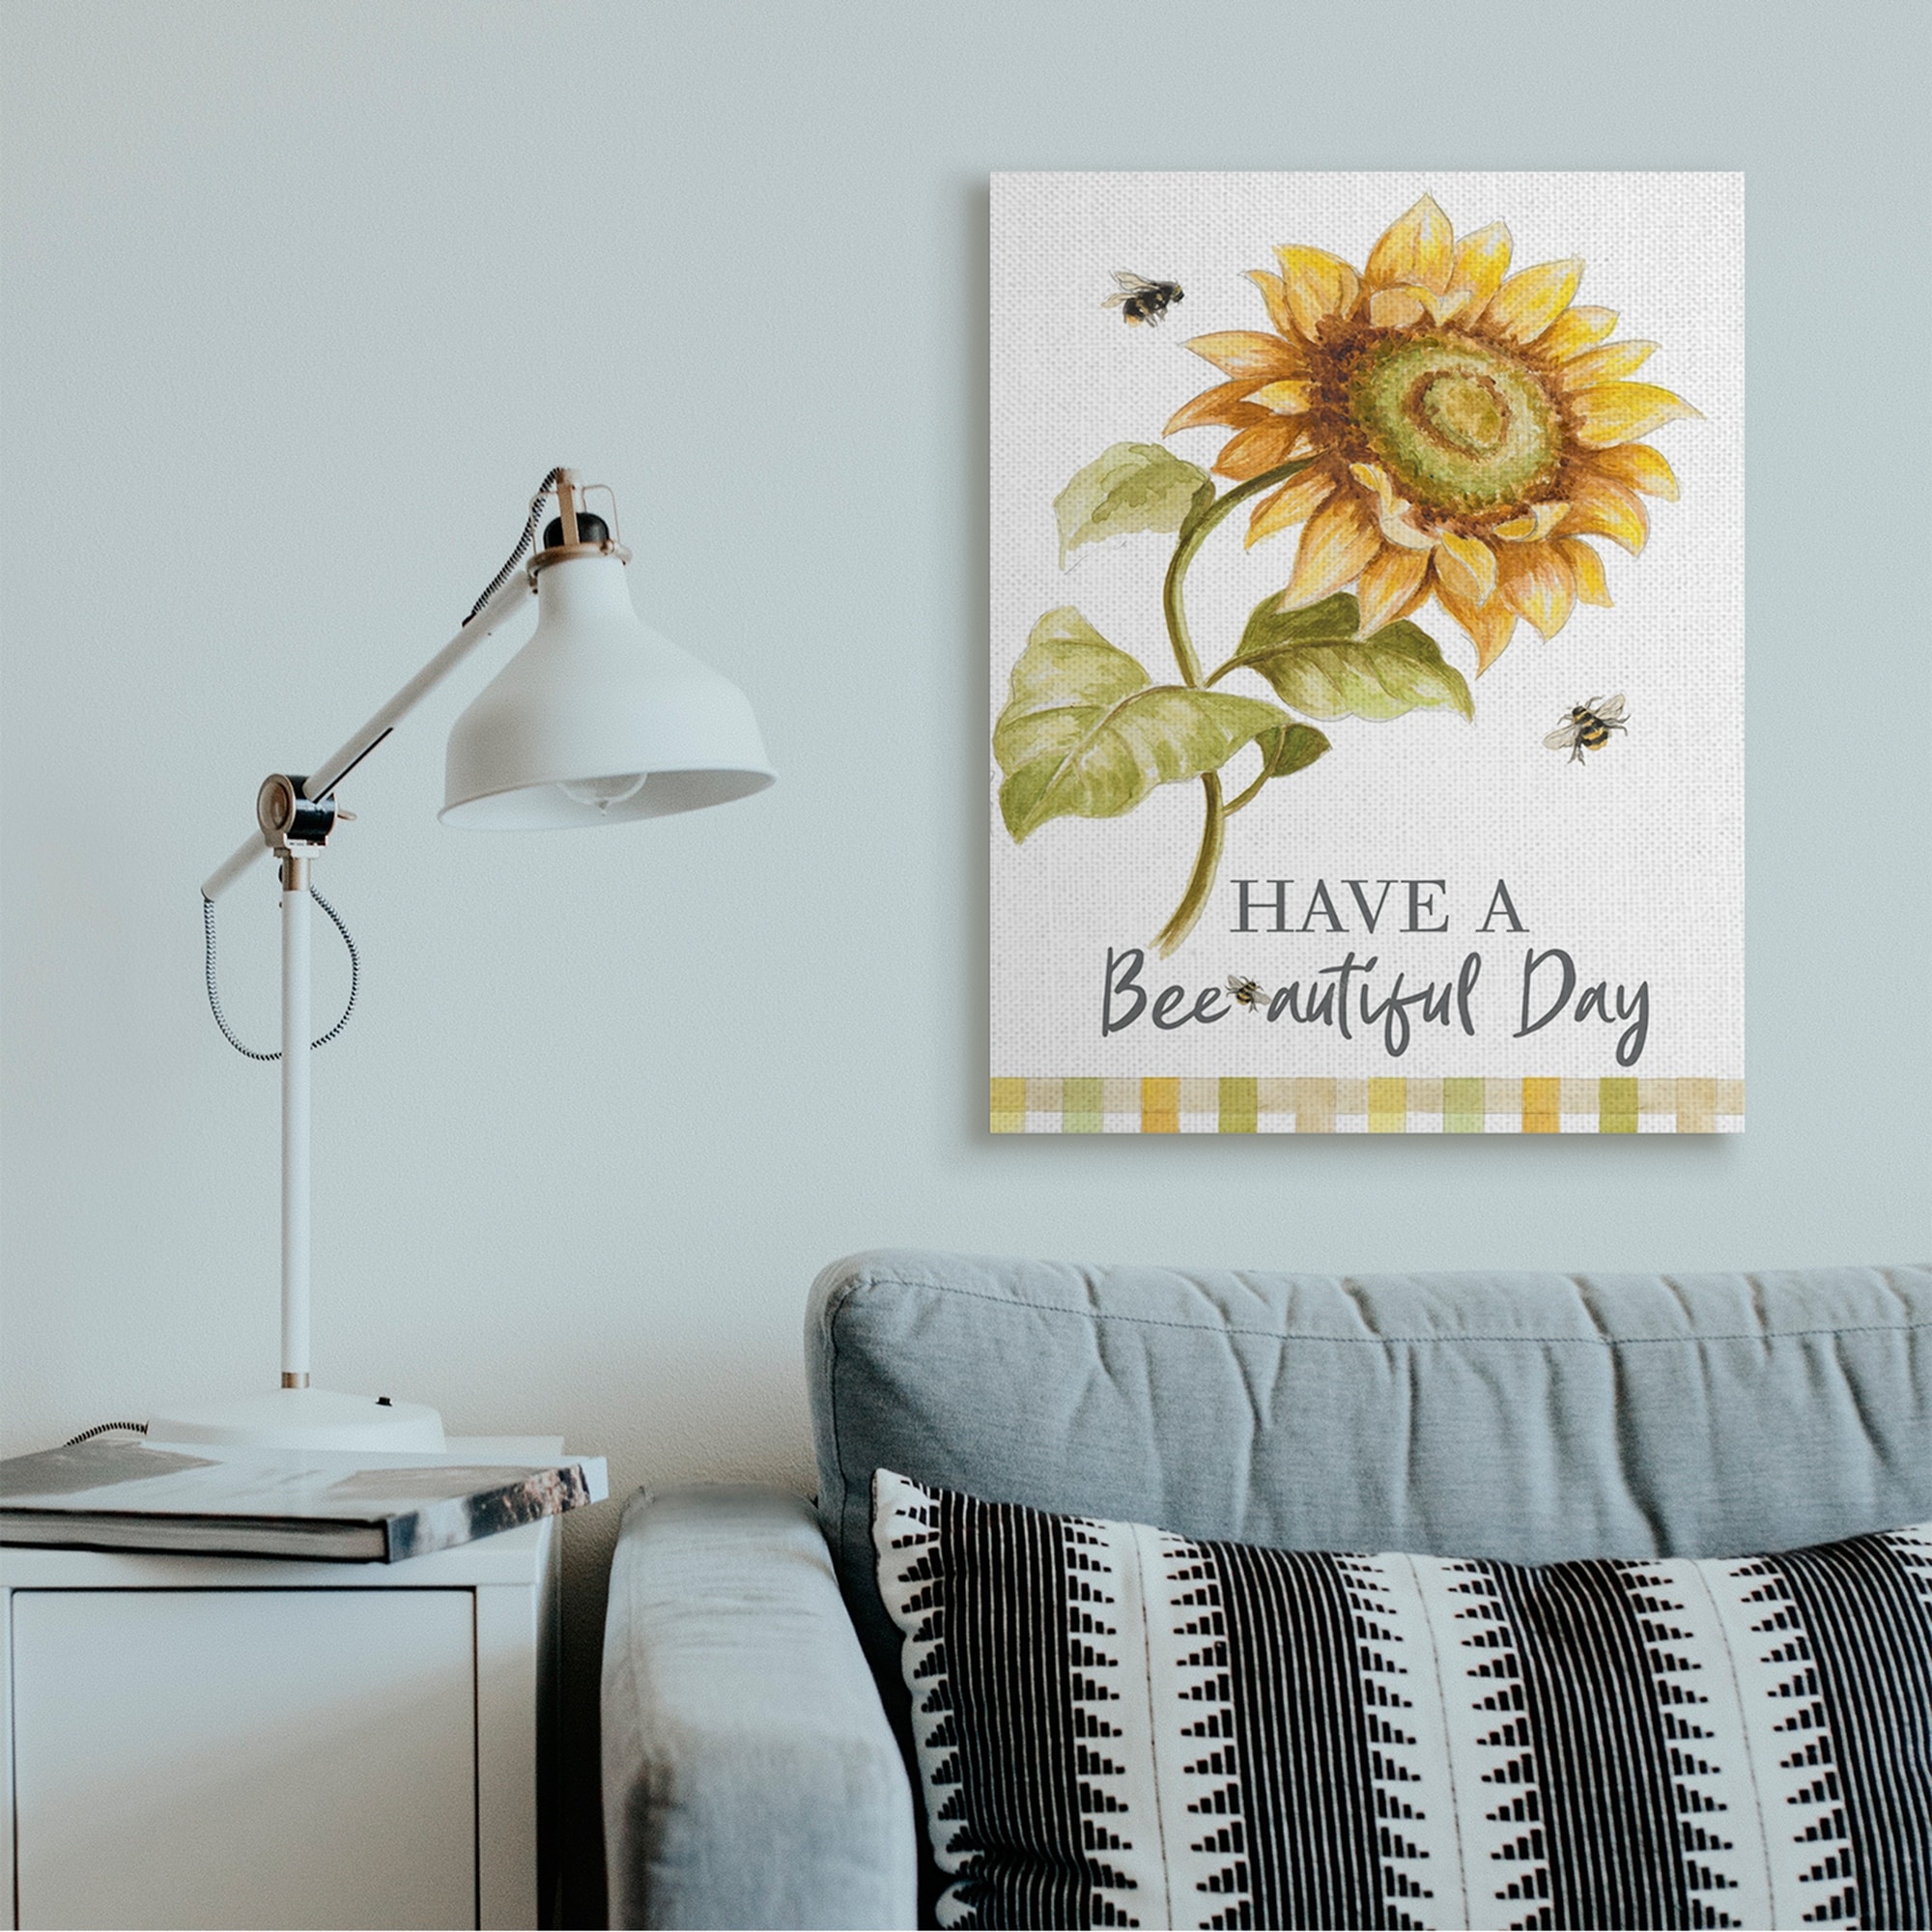 https://ak1.ostkcdn.com/images/products/is/images/direct/ecc29b8a724d7b4ed9b39be1d0b02afa19eae086/Stupell-Industries-Have-a-Beautiful-Day-Country-Bee-Pun-Sunflower-Canvas-Wall-Art.jpg